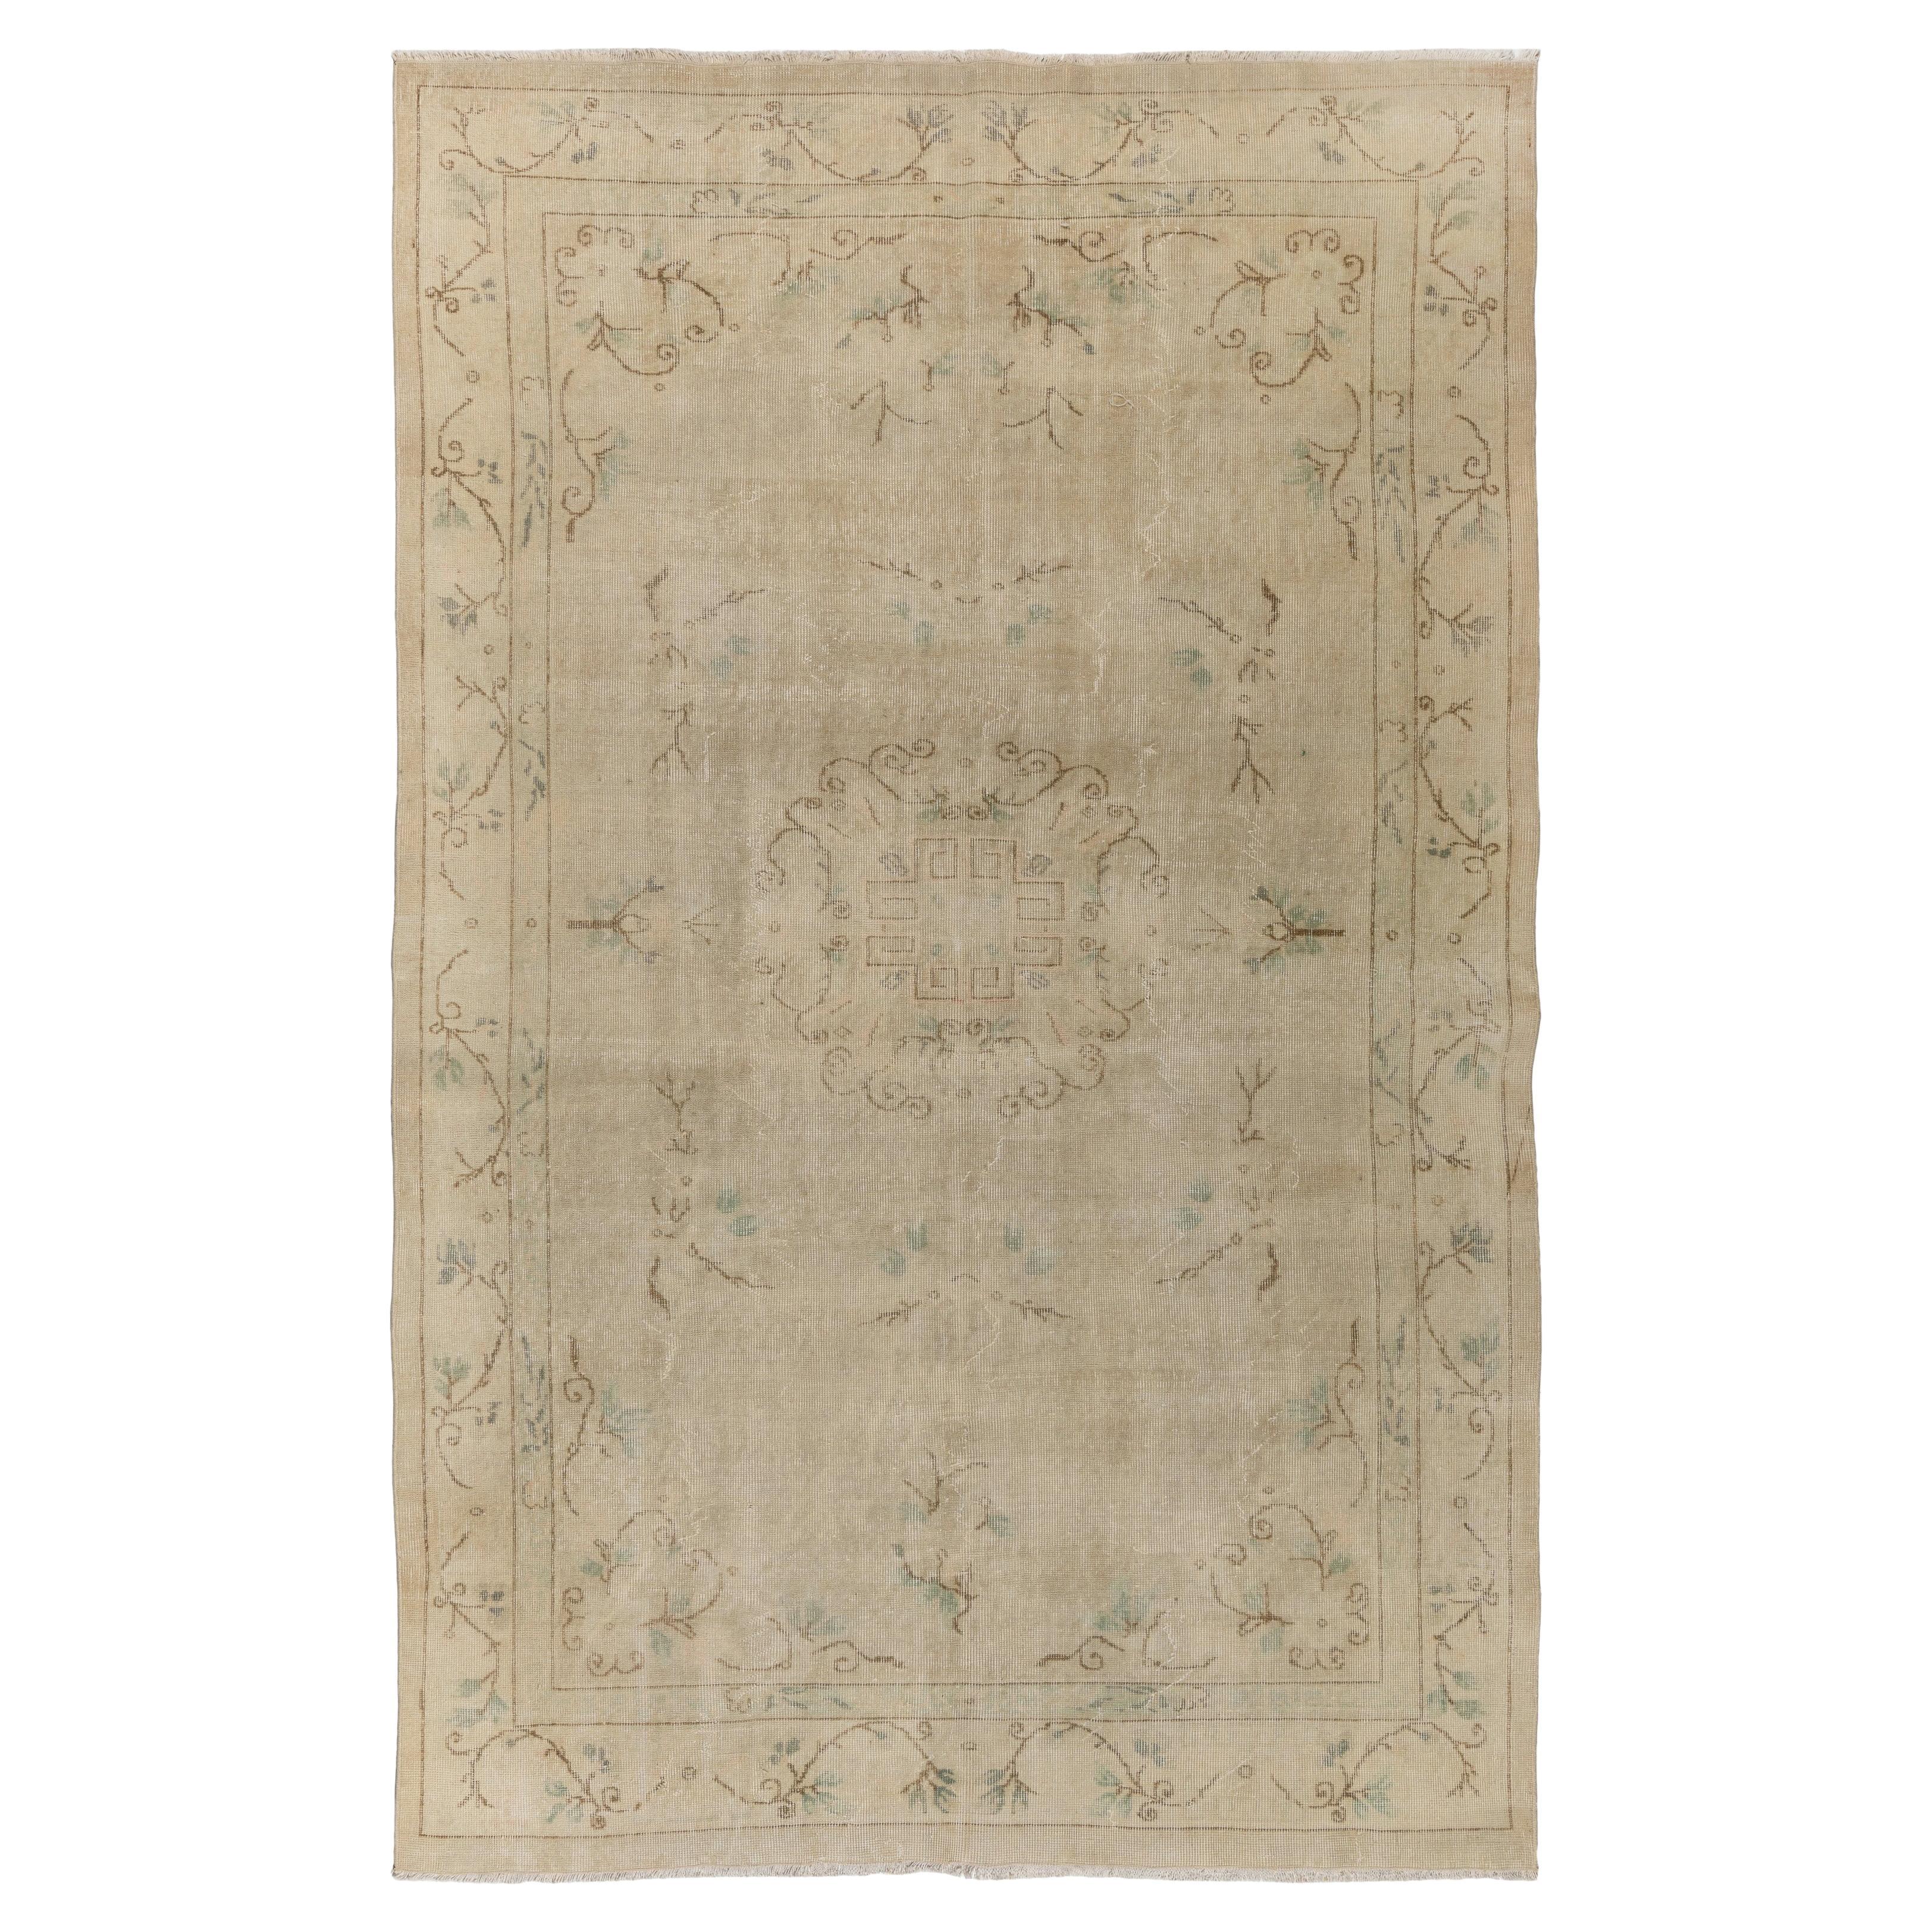 6.5x10 Ft Handmade Art Deco Chinese design Antique Washed Rug in Neutral Colors For Sale